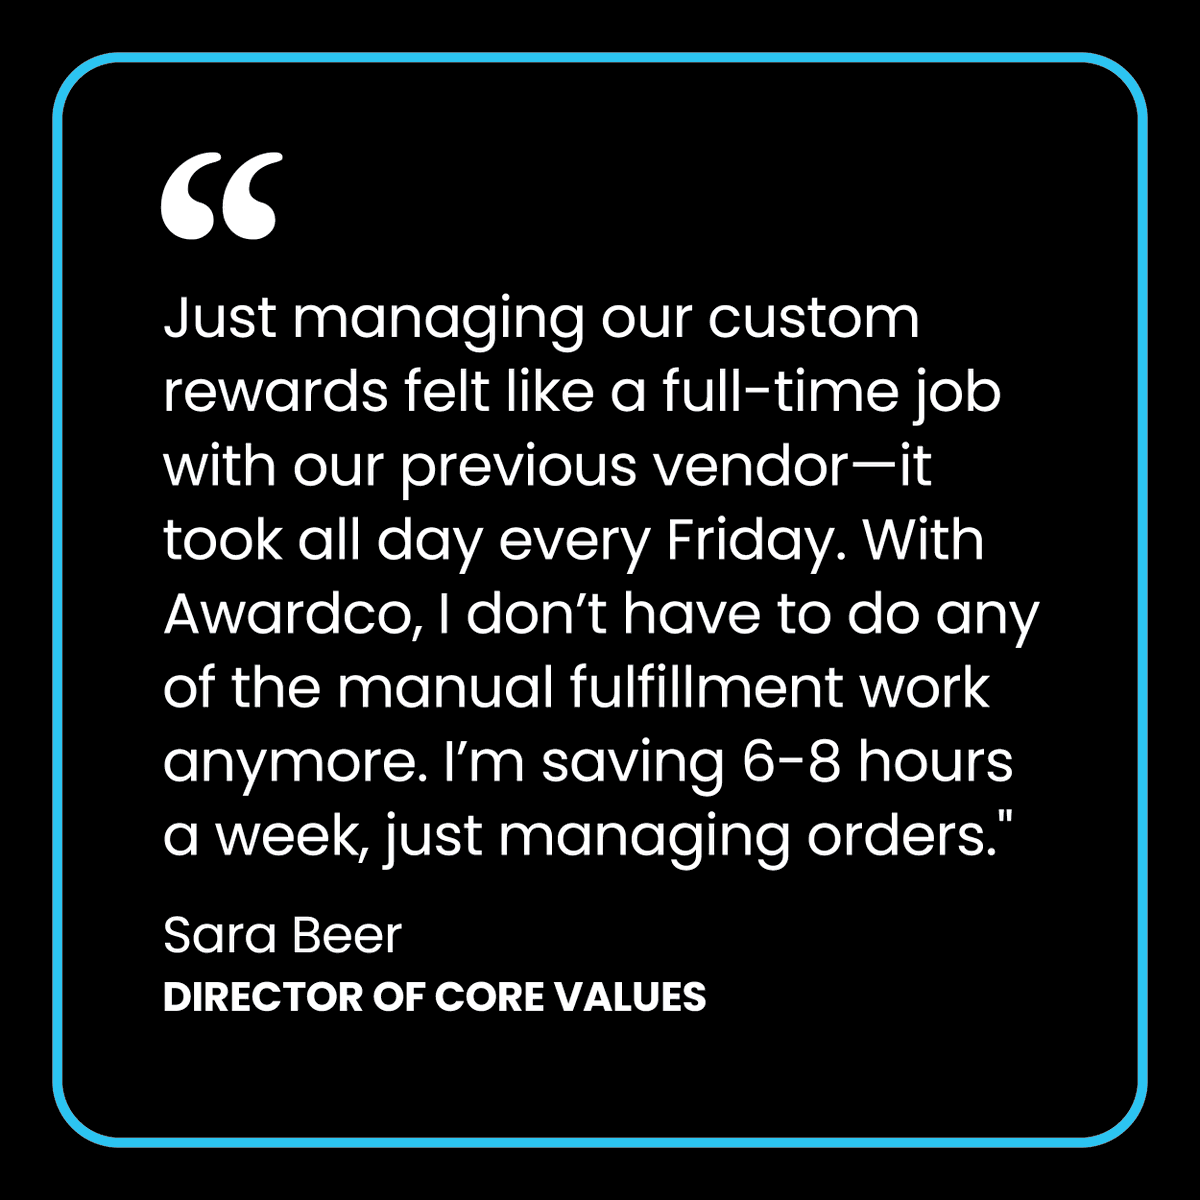 Boosting productivity—in more ways than one! 'With Awardco, I don't have to do any of the fulfillment work anymore. I'm saving 6-8 hours a week.' -Sara Beer, The Nest Schools #employeeengagement #hr #peopleops #culture